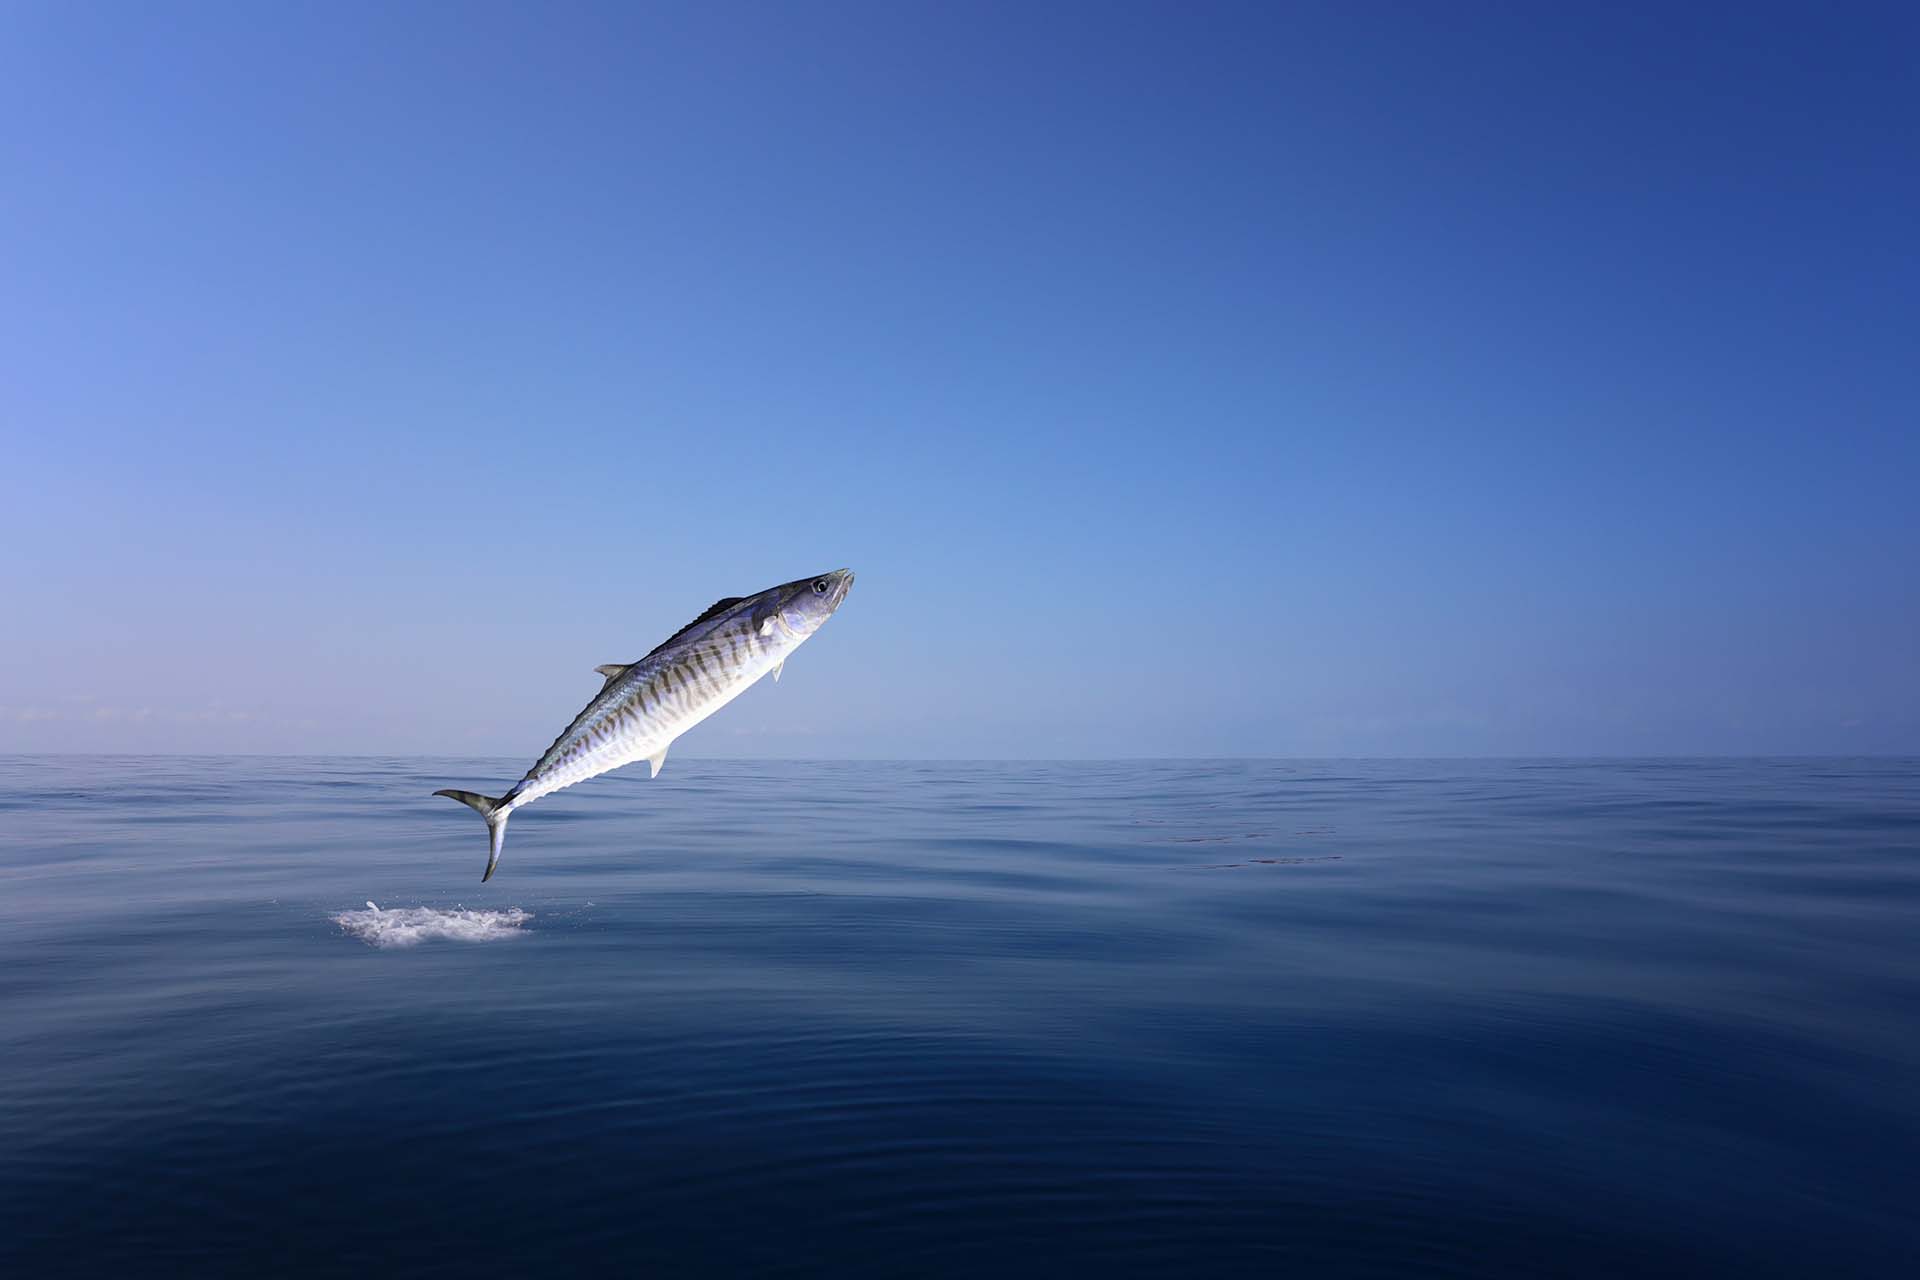 King Mackerel jumping over the sea to hunt for food